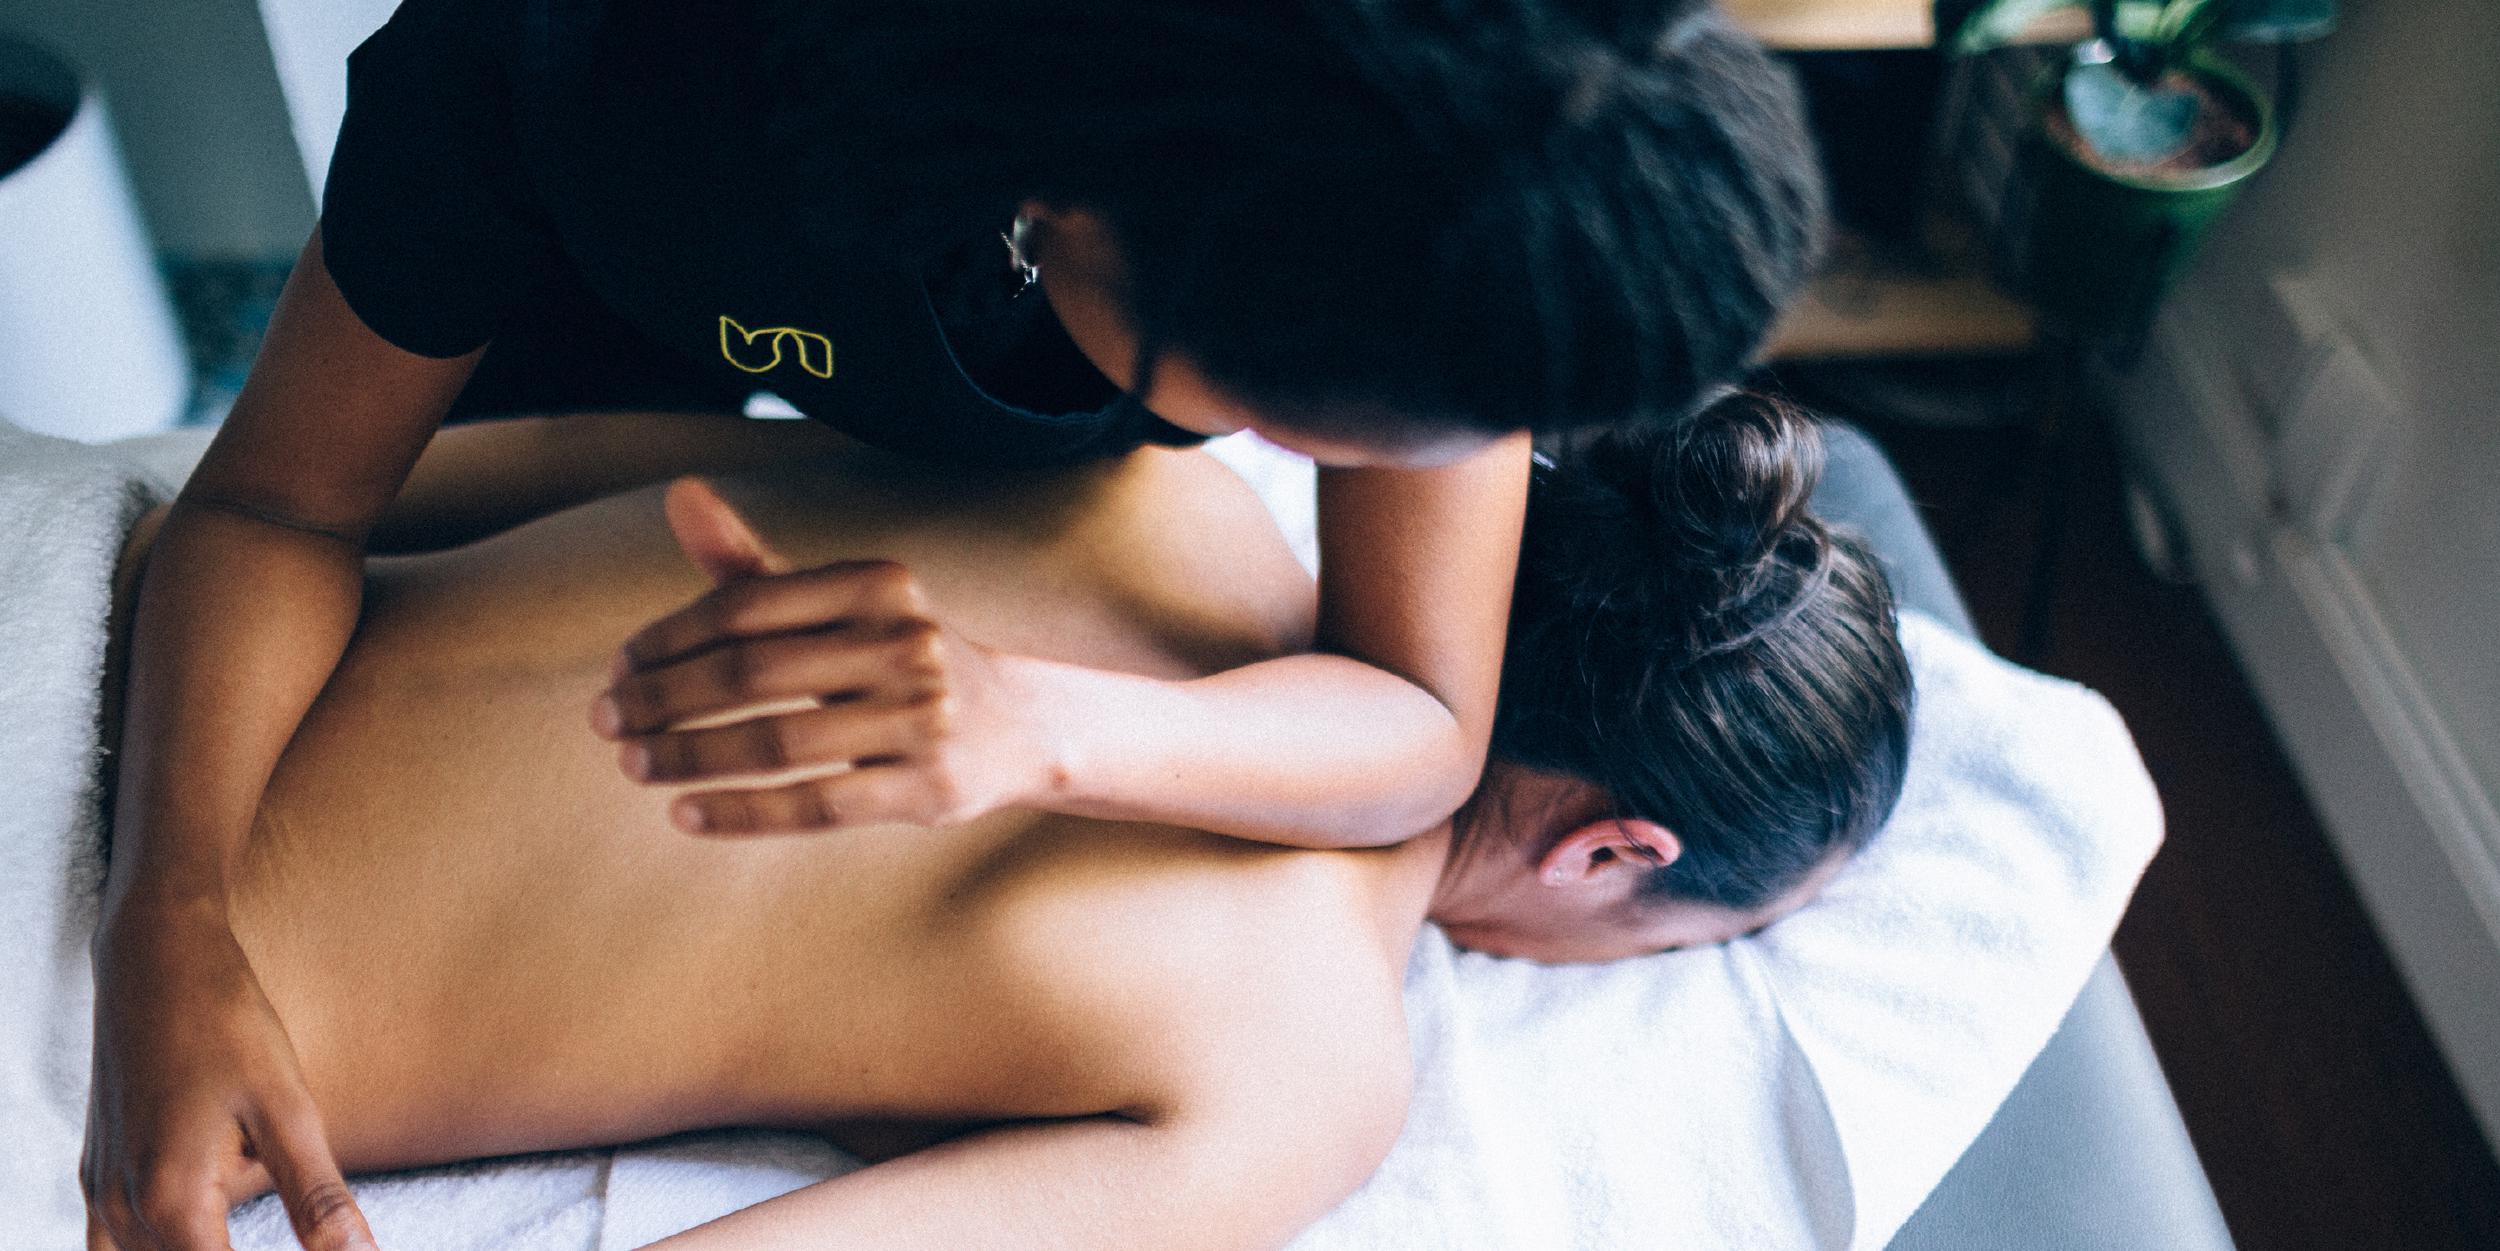 Jack Tang is lobbying the UK Government to provide greater financial support for massage therapists